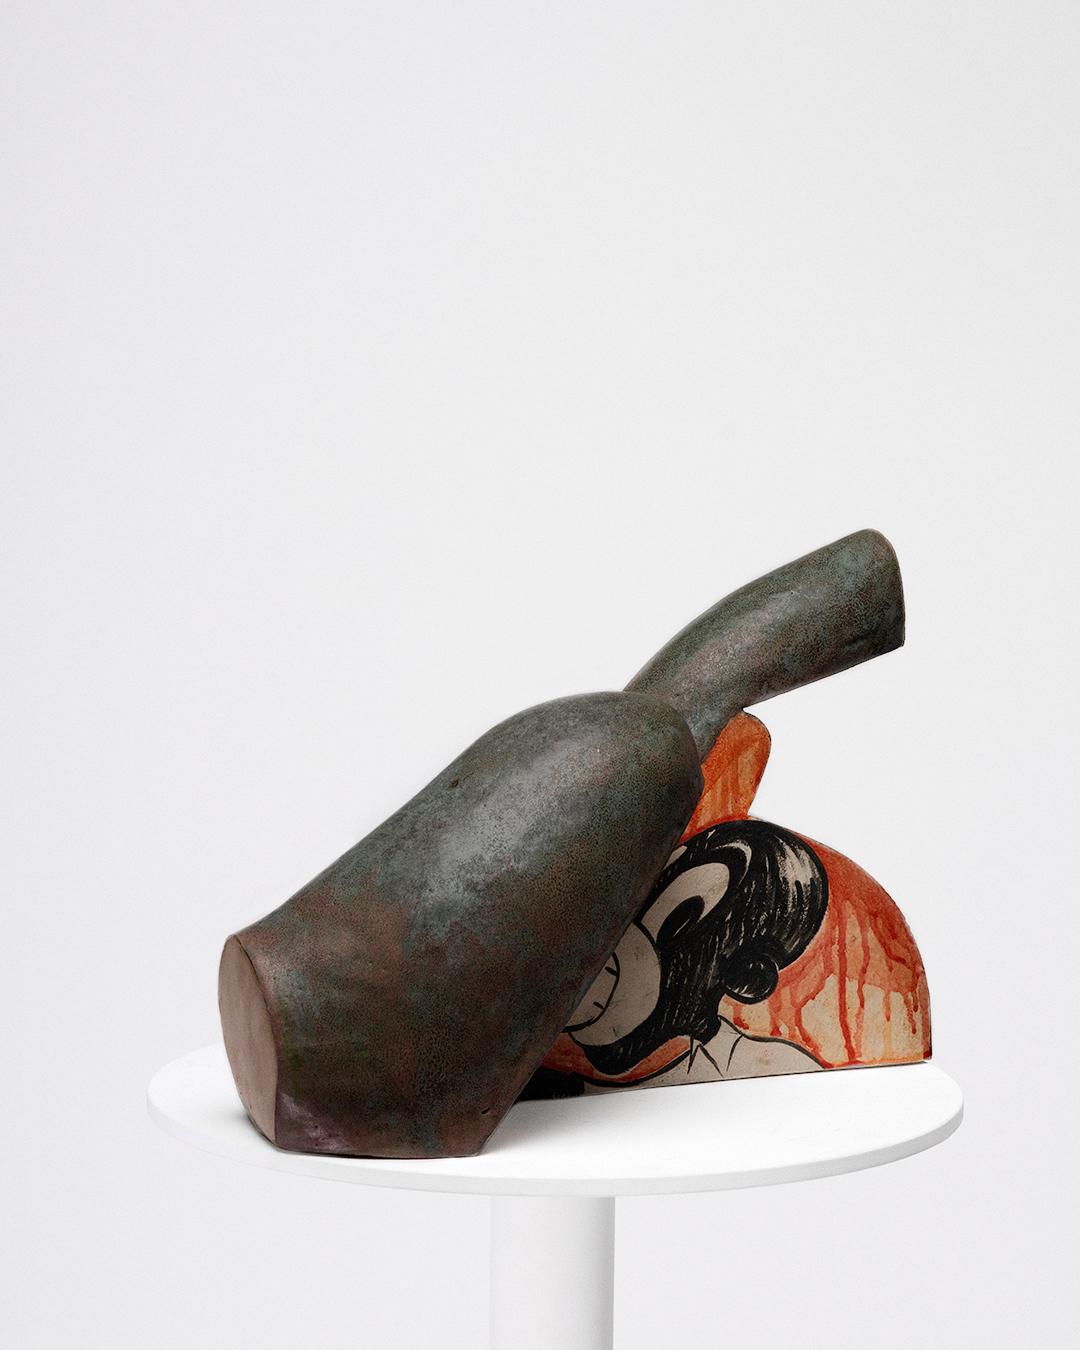 Malcolm Mobutu Smith
Hoof 'n Mouth, 2010
Stoneware, slip and glaze
15 x 20 x 13 in.